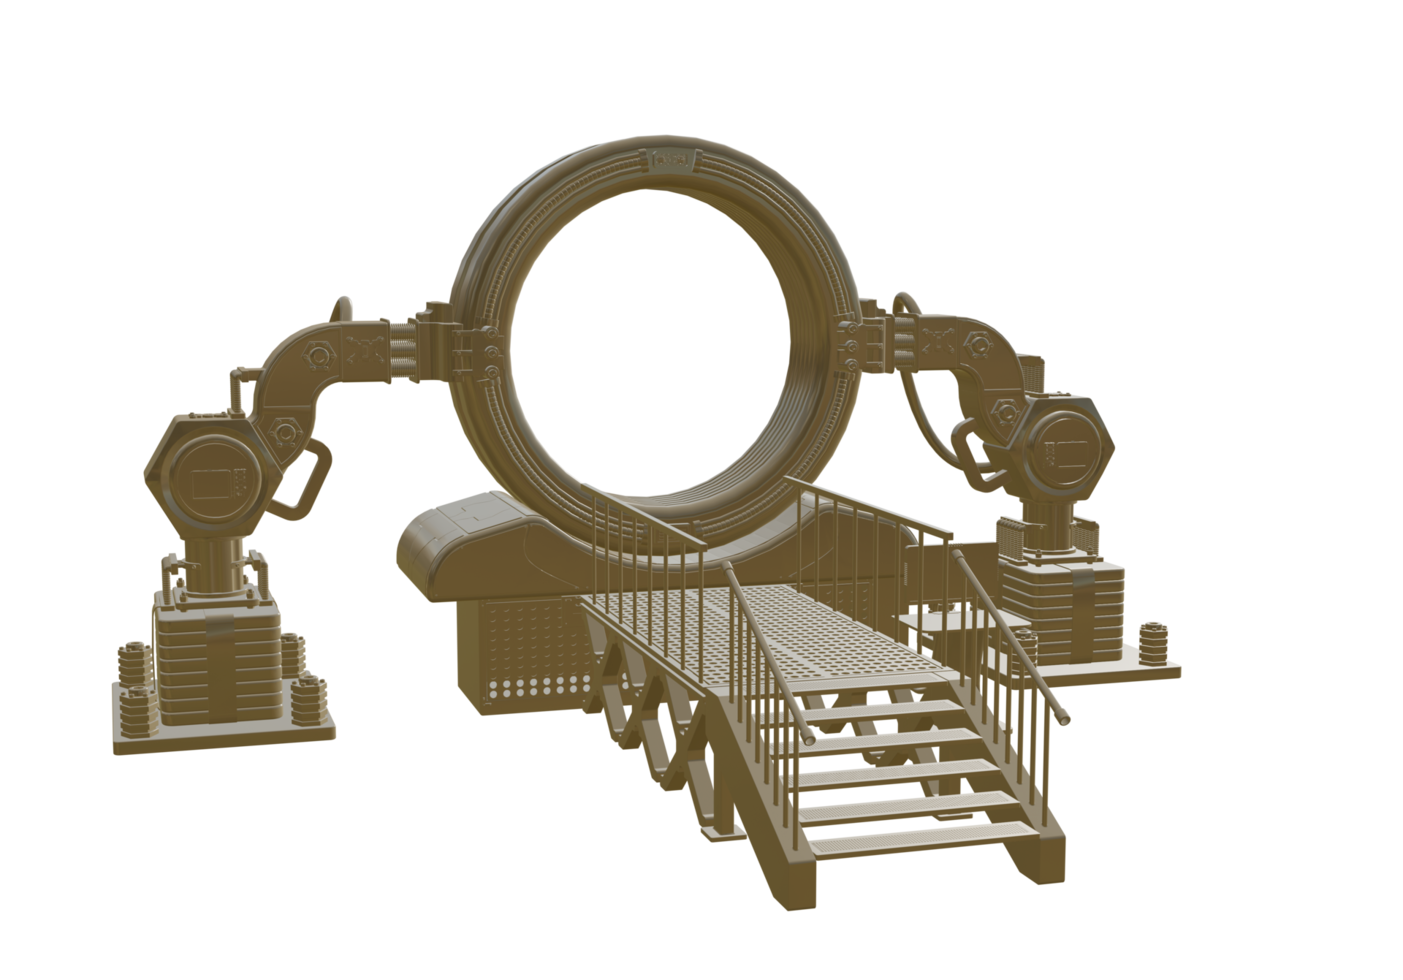 Machine gold color high quality 3d render png